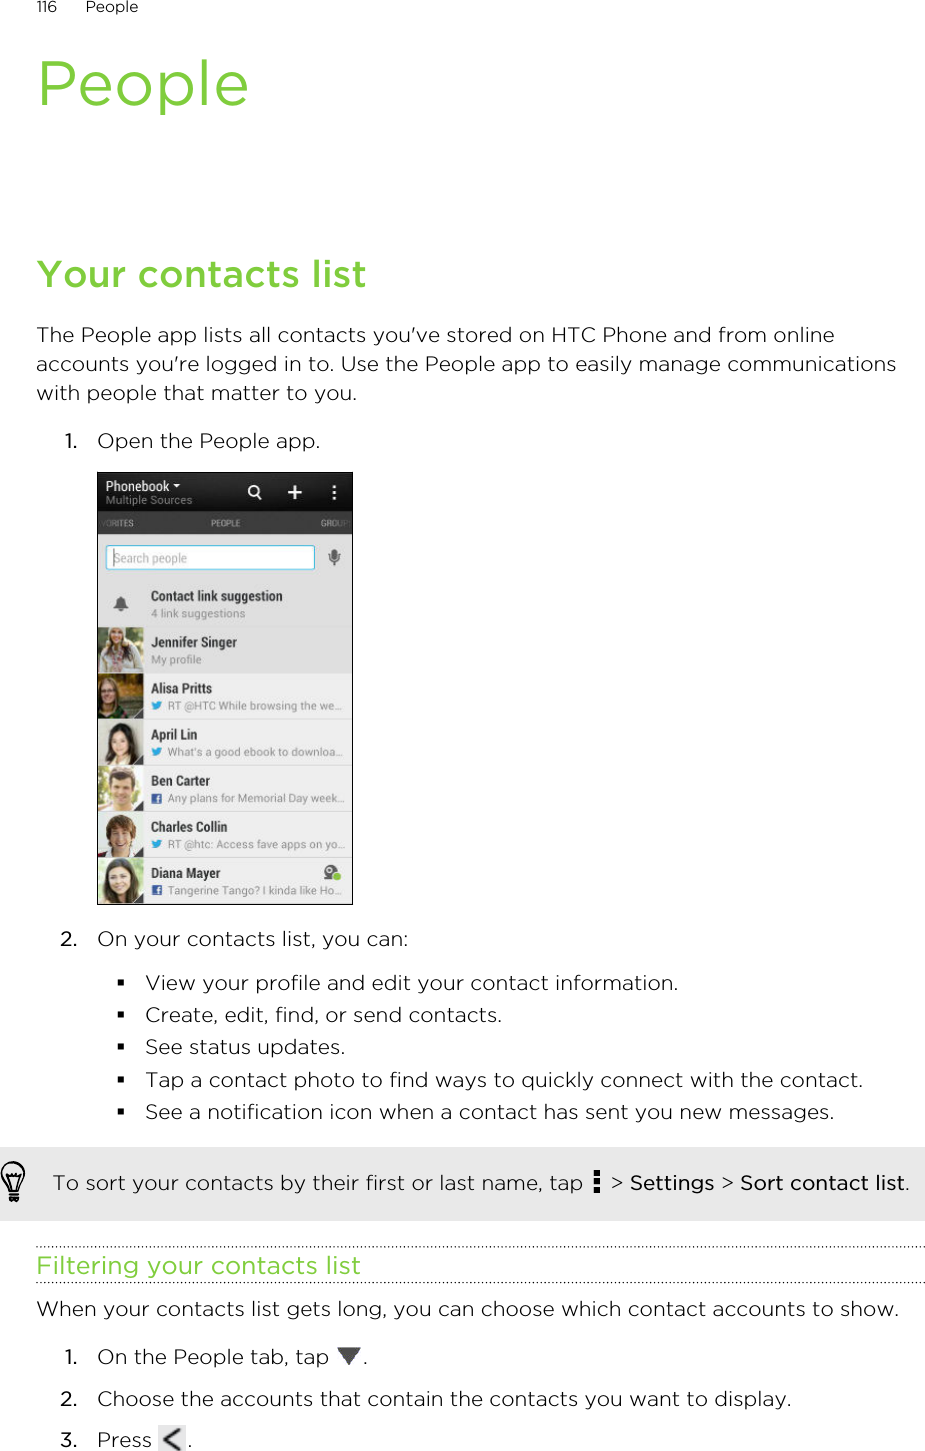 PeopleYour contacts listThe People app lists all contacts you&apos;ve stored on HTC Phone and from onlineaccounts you&apos;re logged in to. Use the People app to easily manage communicationswith people that matter to you.1. Open the People app. 2. On your contacts list, you can:§View your profile and edit your contact information.§Create, edit, find, or send contacts.§See status updates.§Tap a contact photo to find ways to quickly connect with the contact.§See a notification icon when a contact has sent you new messages.To sort your contacts by their first or last name, tap   &gt; Settings &gt; Sort contact list.Filtering your contacts listWhen your contacts list gets long, you can choose which contact accounts to show.1. On the People tab, tap  .2. Choose the accounts that contain the contacts you want to display.3. Press  .116 People